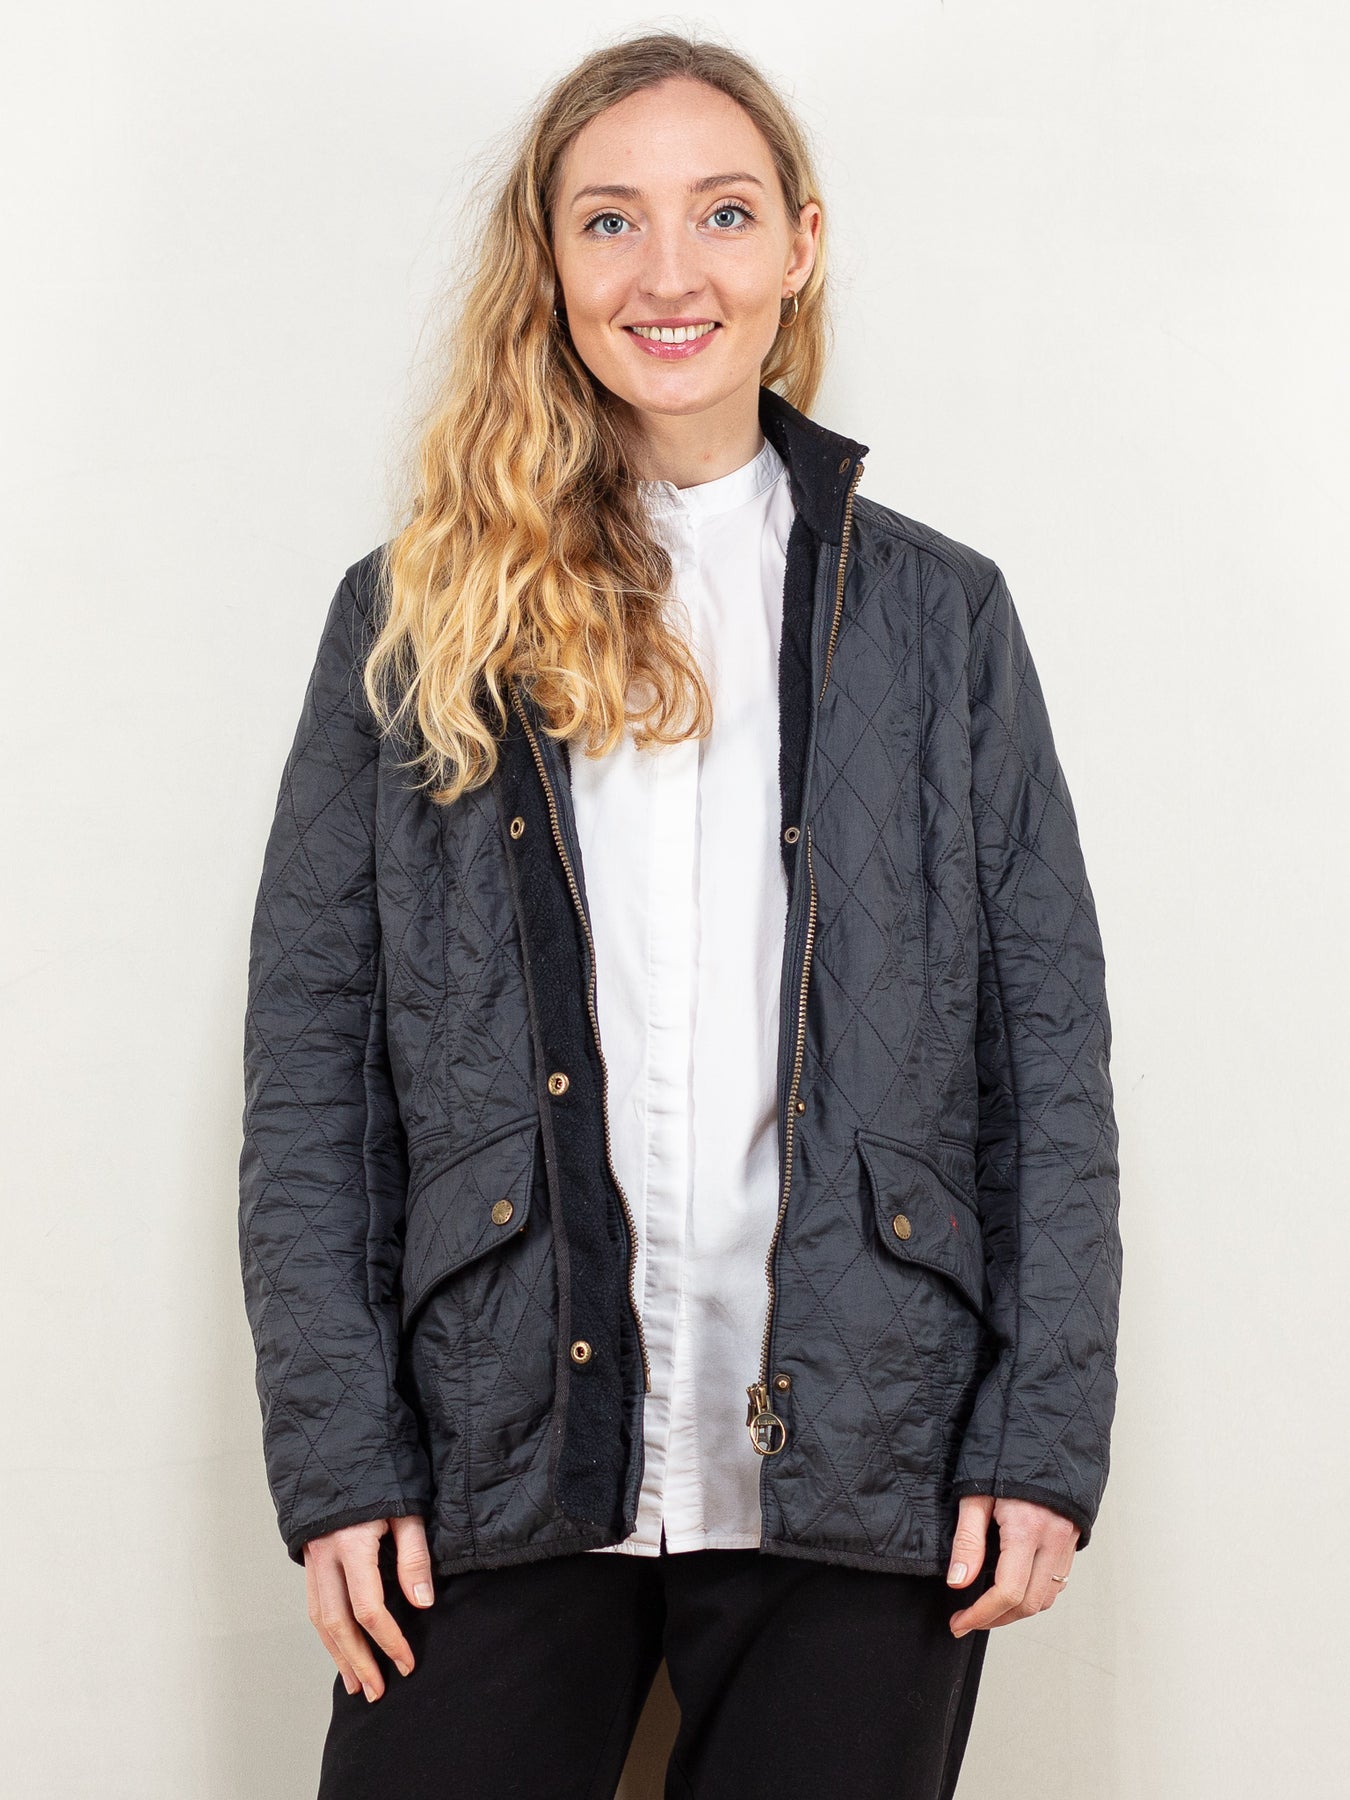 Womens Barbour Quilted Bomber Jackets | engisfun.com